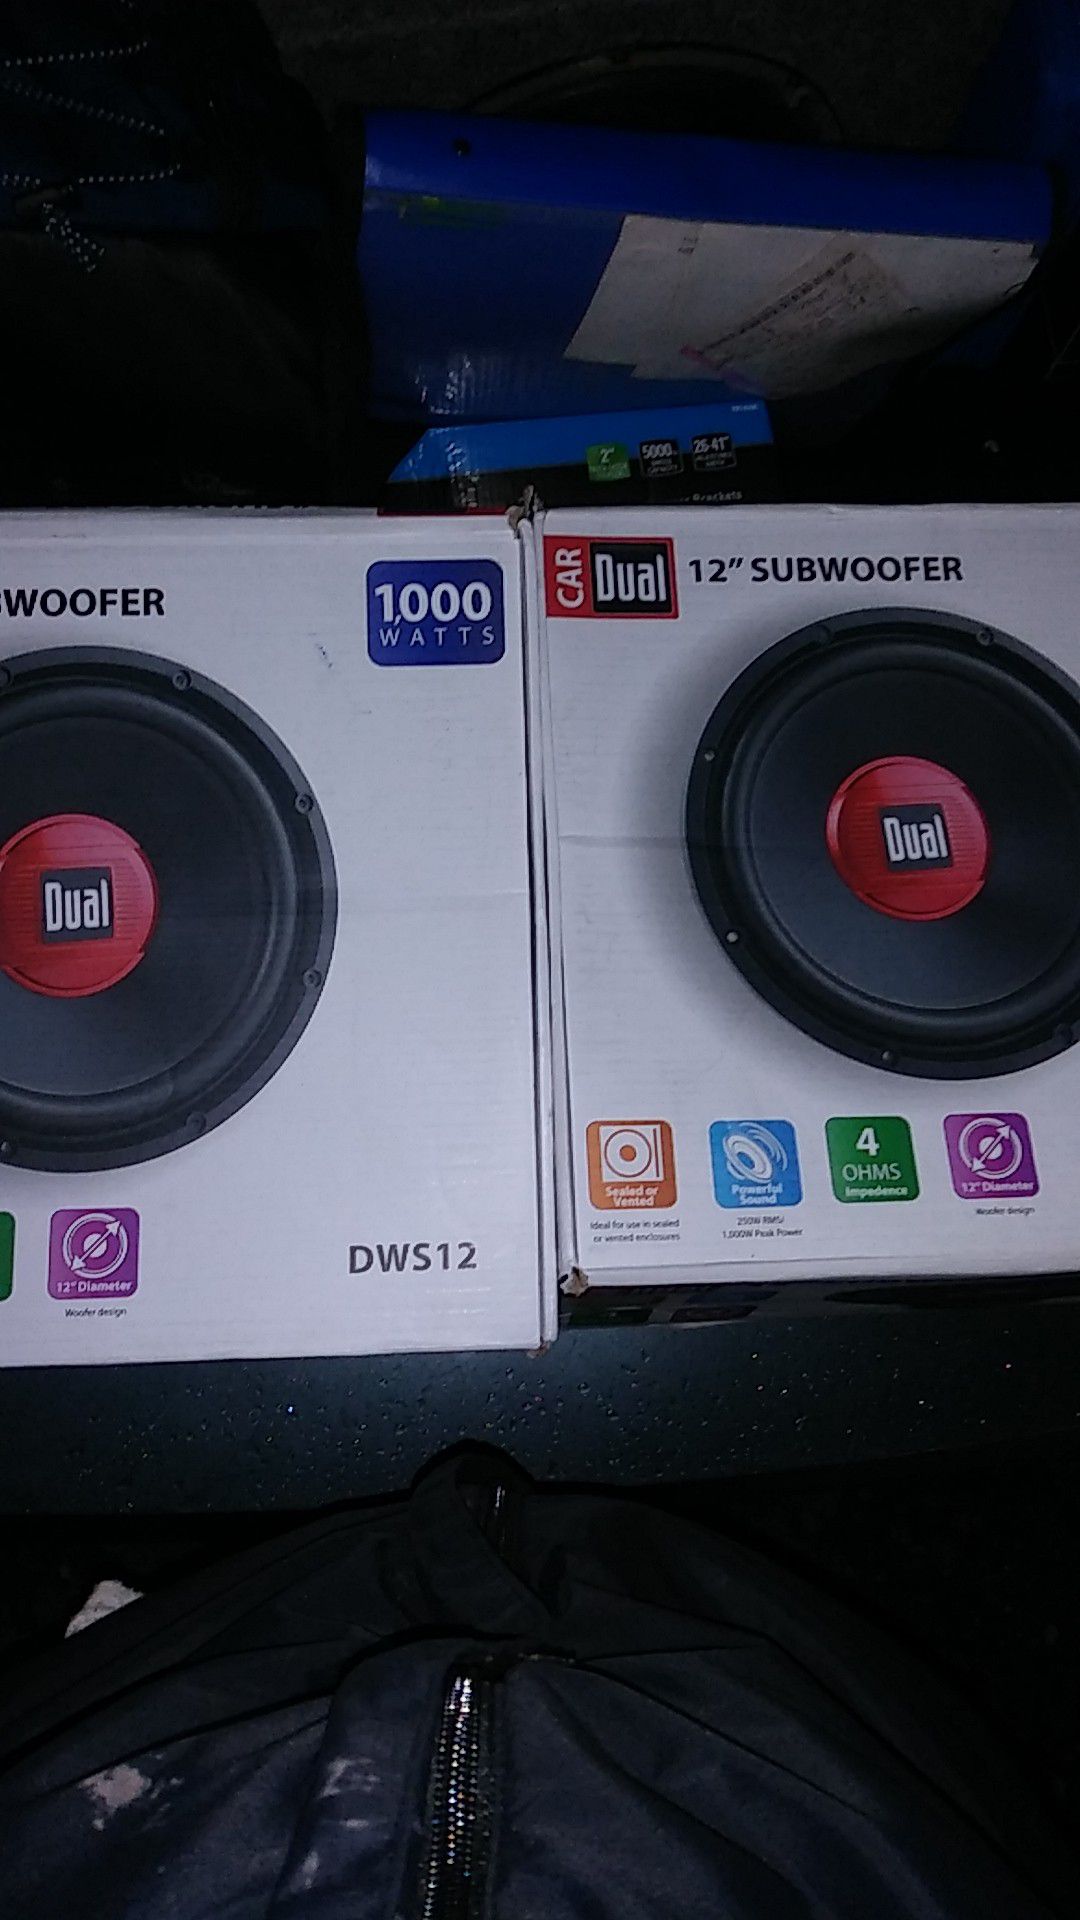 2 12" Dual Subwoofers 1000 watts